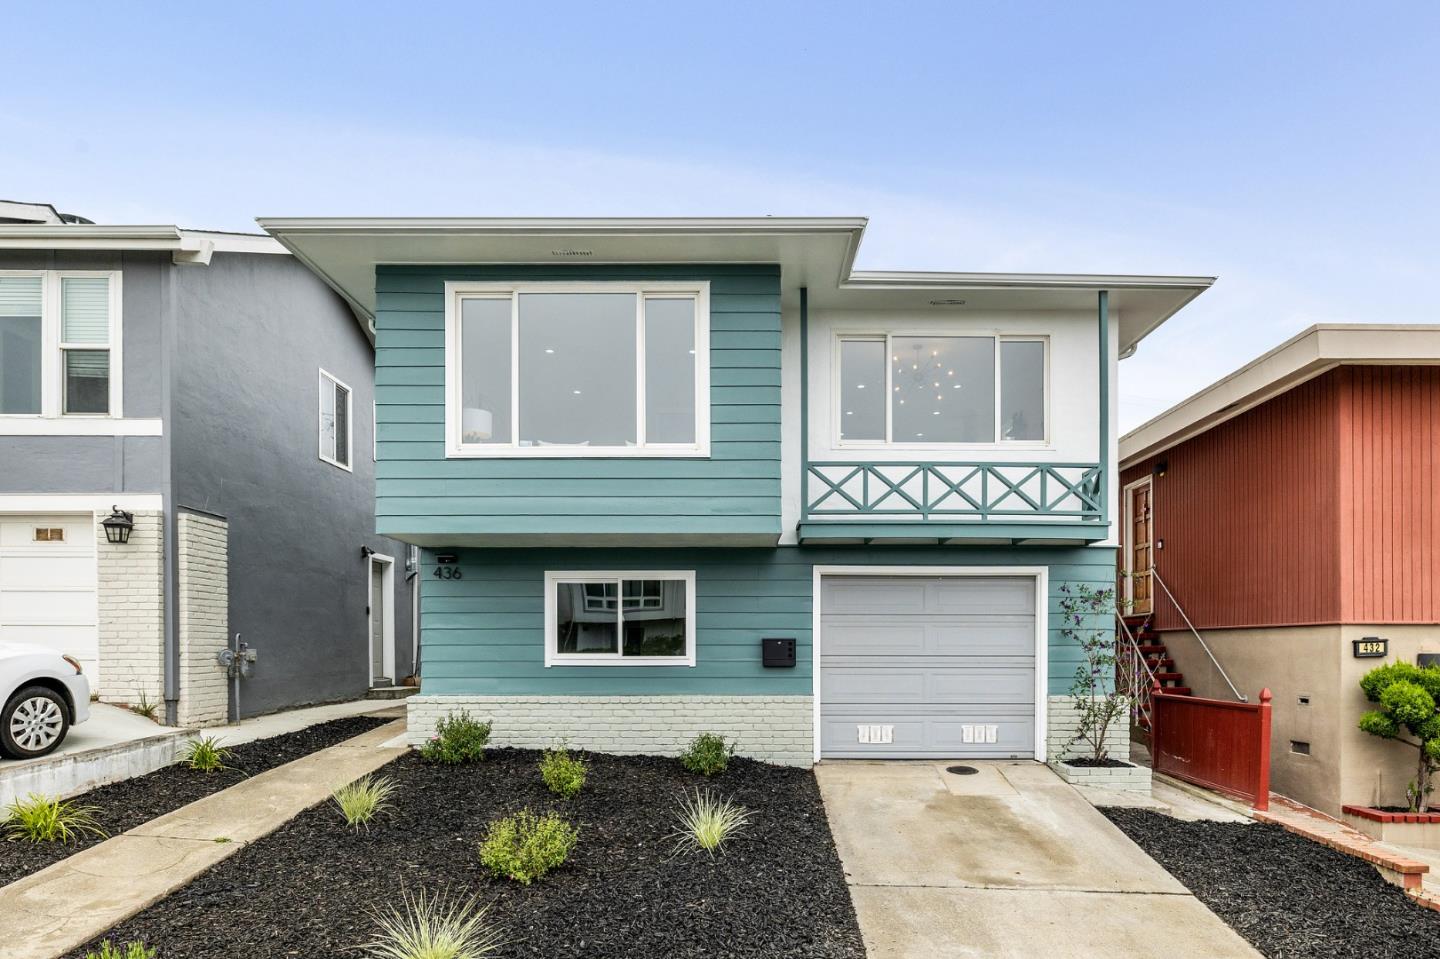 436 Lakeshire DR, DALY CITY, CA 94015